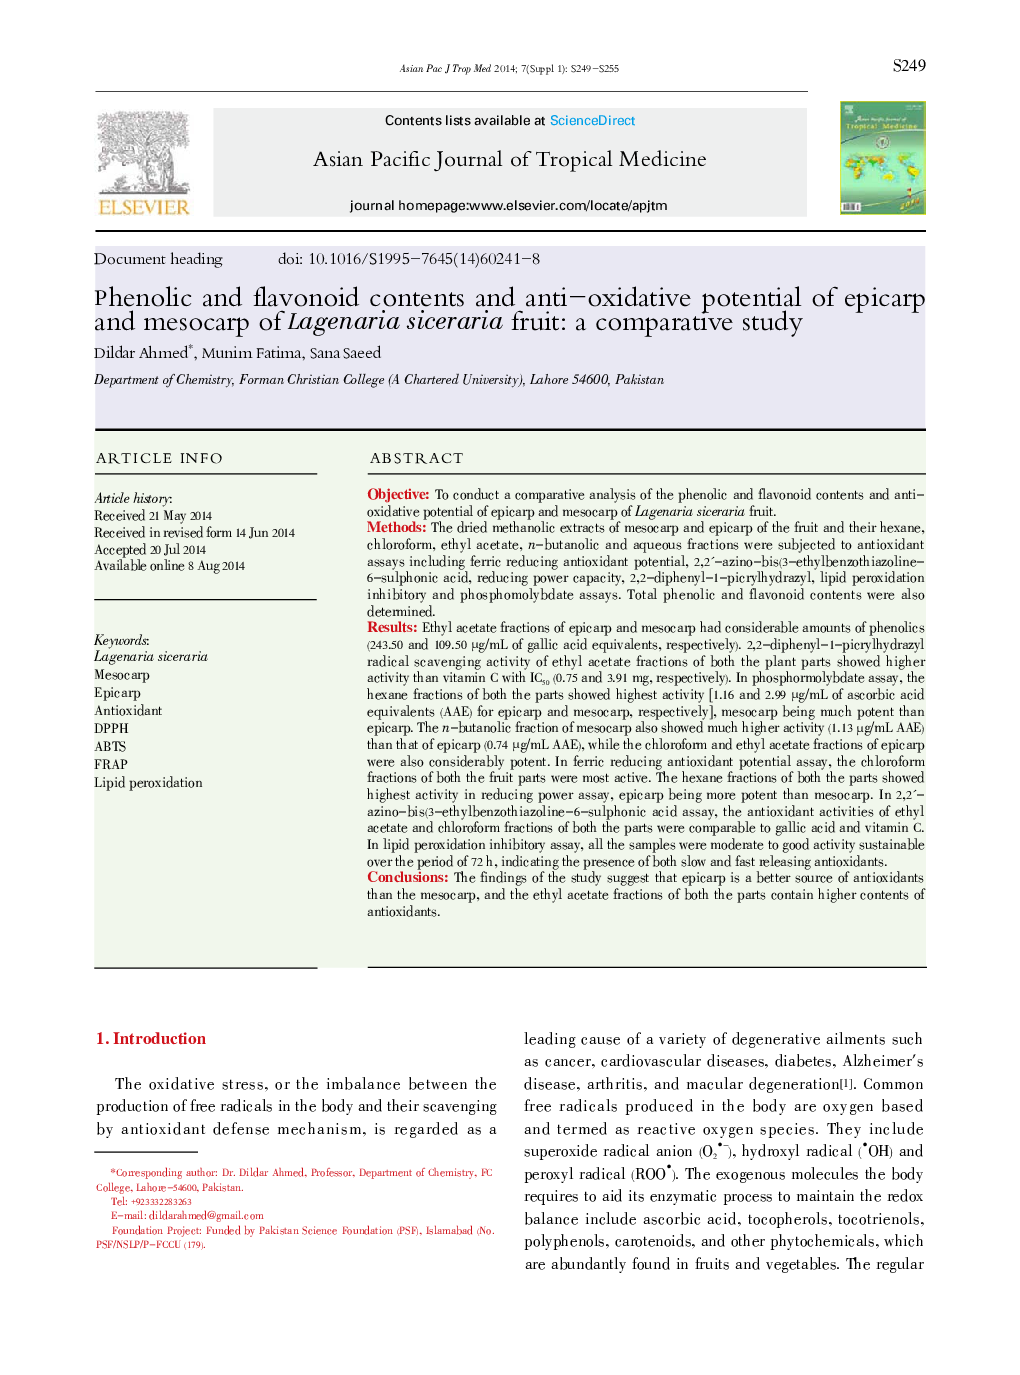 Phenolic and flavonoid contents and anti-oxidative potential of epicarp and mesocarp of Lagenaria siceraria fruit: a comparative study 